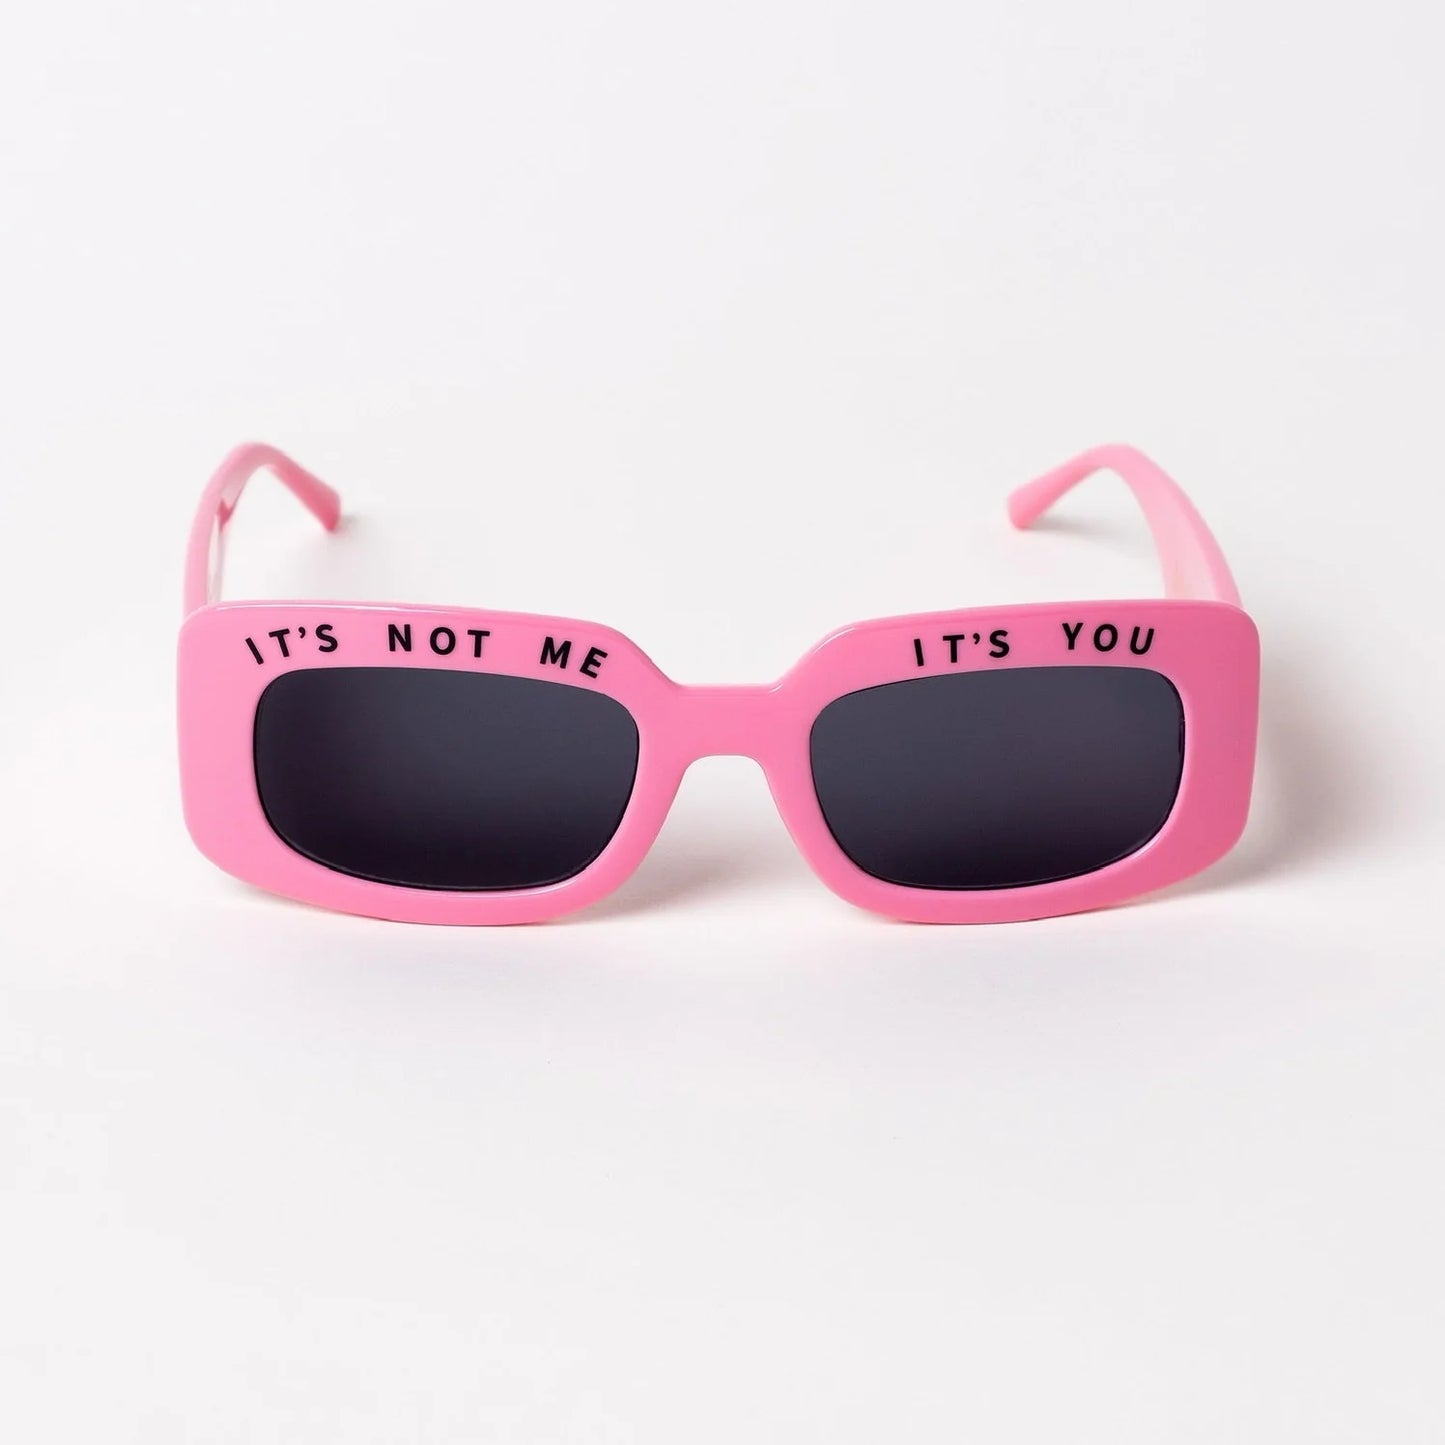 INDY It's Not Me, It's You Sunglasses in Pink